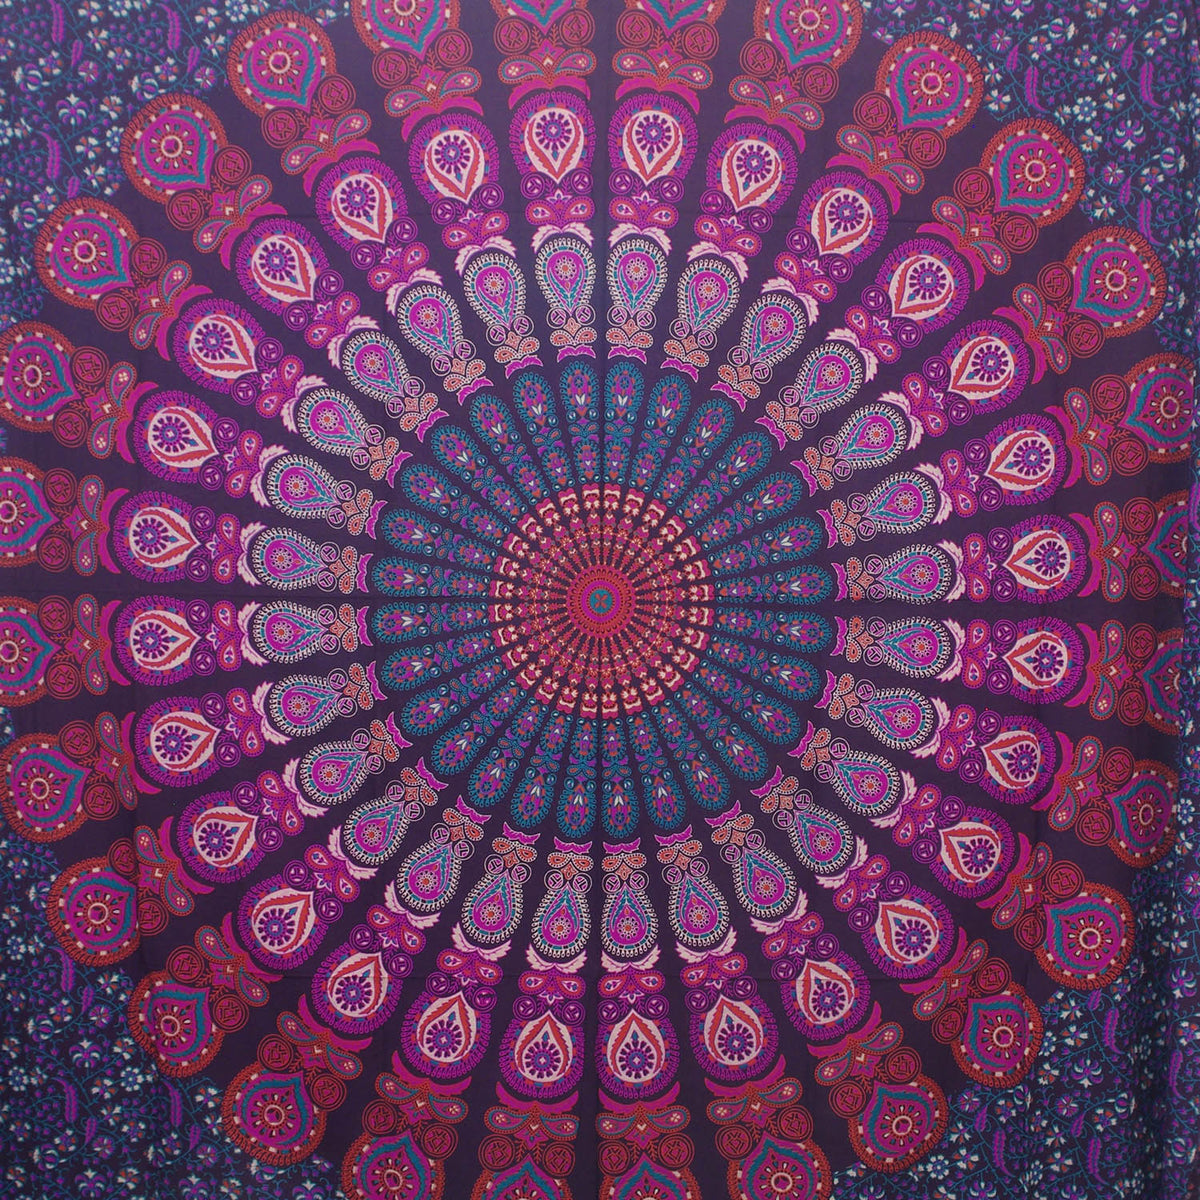 Indian Tapestry Wall Hanging Mandala Bedspread Hippie Gypsy Throw Bohemian Cover